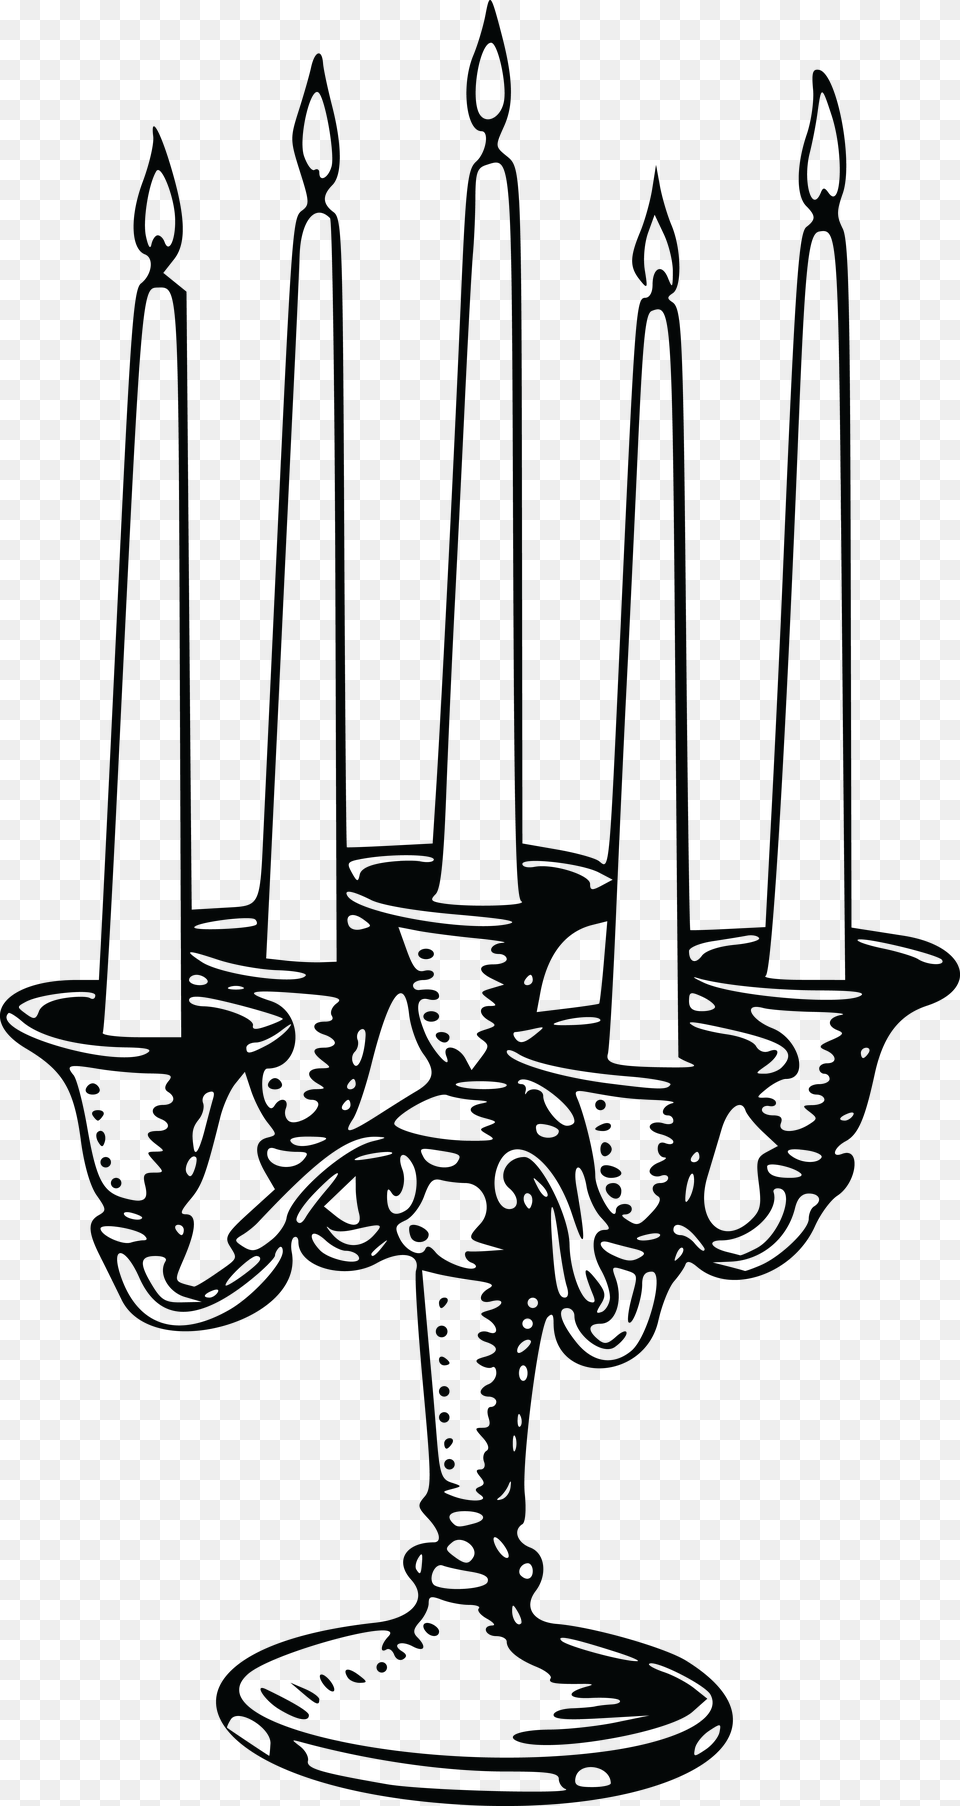 Clipart Of A Candle Stick Candlestick Clip Art Black And White, Chandelier, Lamp Free Png Download